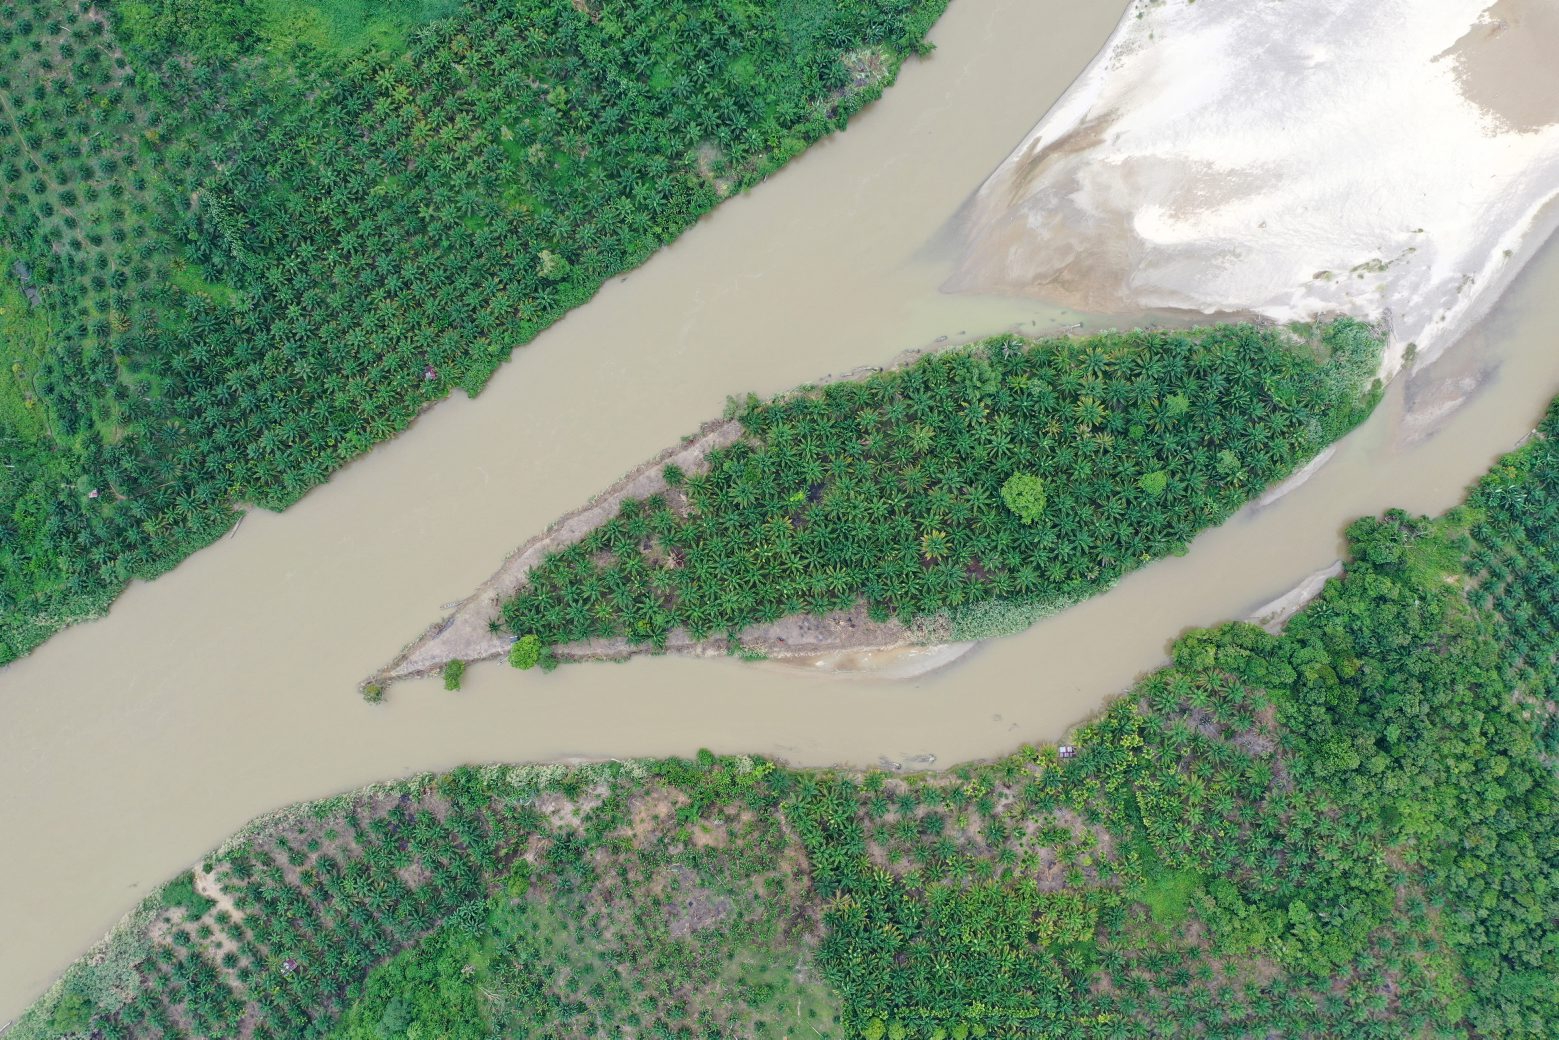 epa07747197 A photograph taken with a drone shows oil palm plantations, in Bawa village, Subulusalam, Aceh, Indonesia, 27 July 2019 (issued 29 July 2019). Indonesia is the world's largest producer of palm oil, made from the pulp of the palm fruit. It is widely used cooking and the commercial food industry. Many palm plantations have contributed to the deforestation of tropical rainforest, causing the death and displacements of many species, among them the critically endangered orangutan and Sumatran elephant.  EPA/HOTLI SIMANJUNTAK INDONESIA ACEH PALM OIL DEFORESTATION